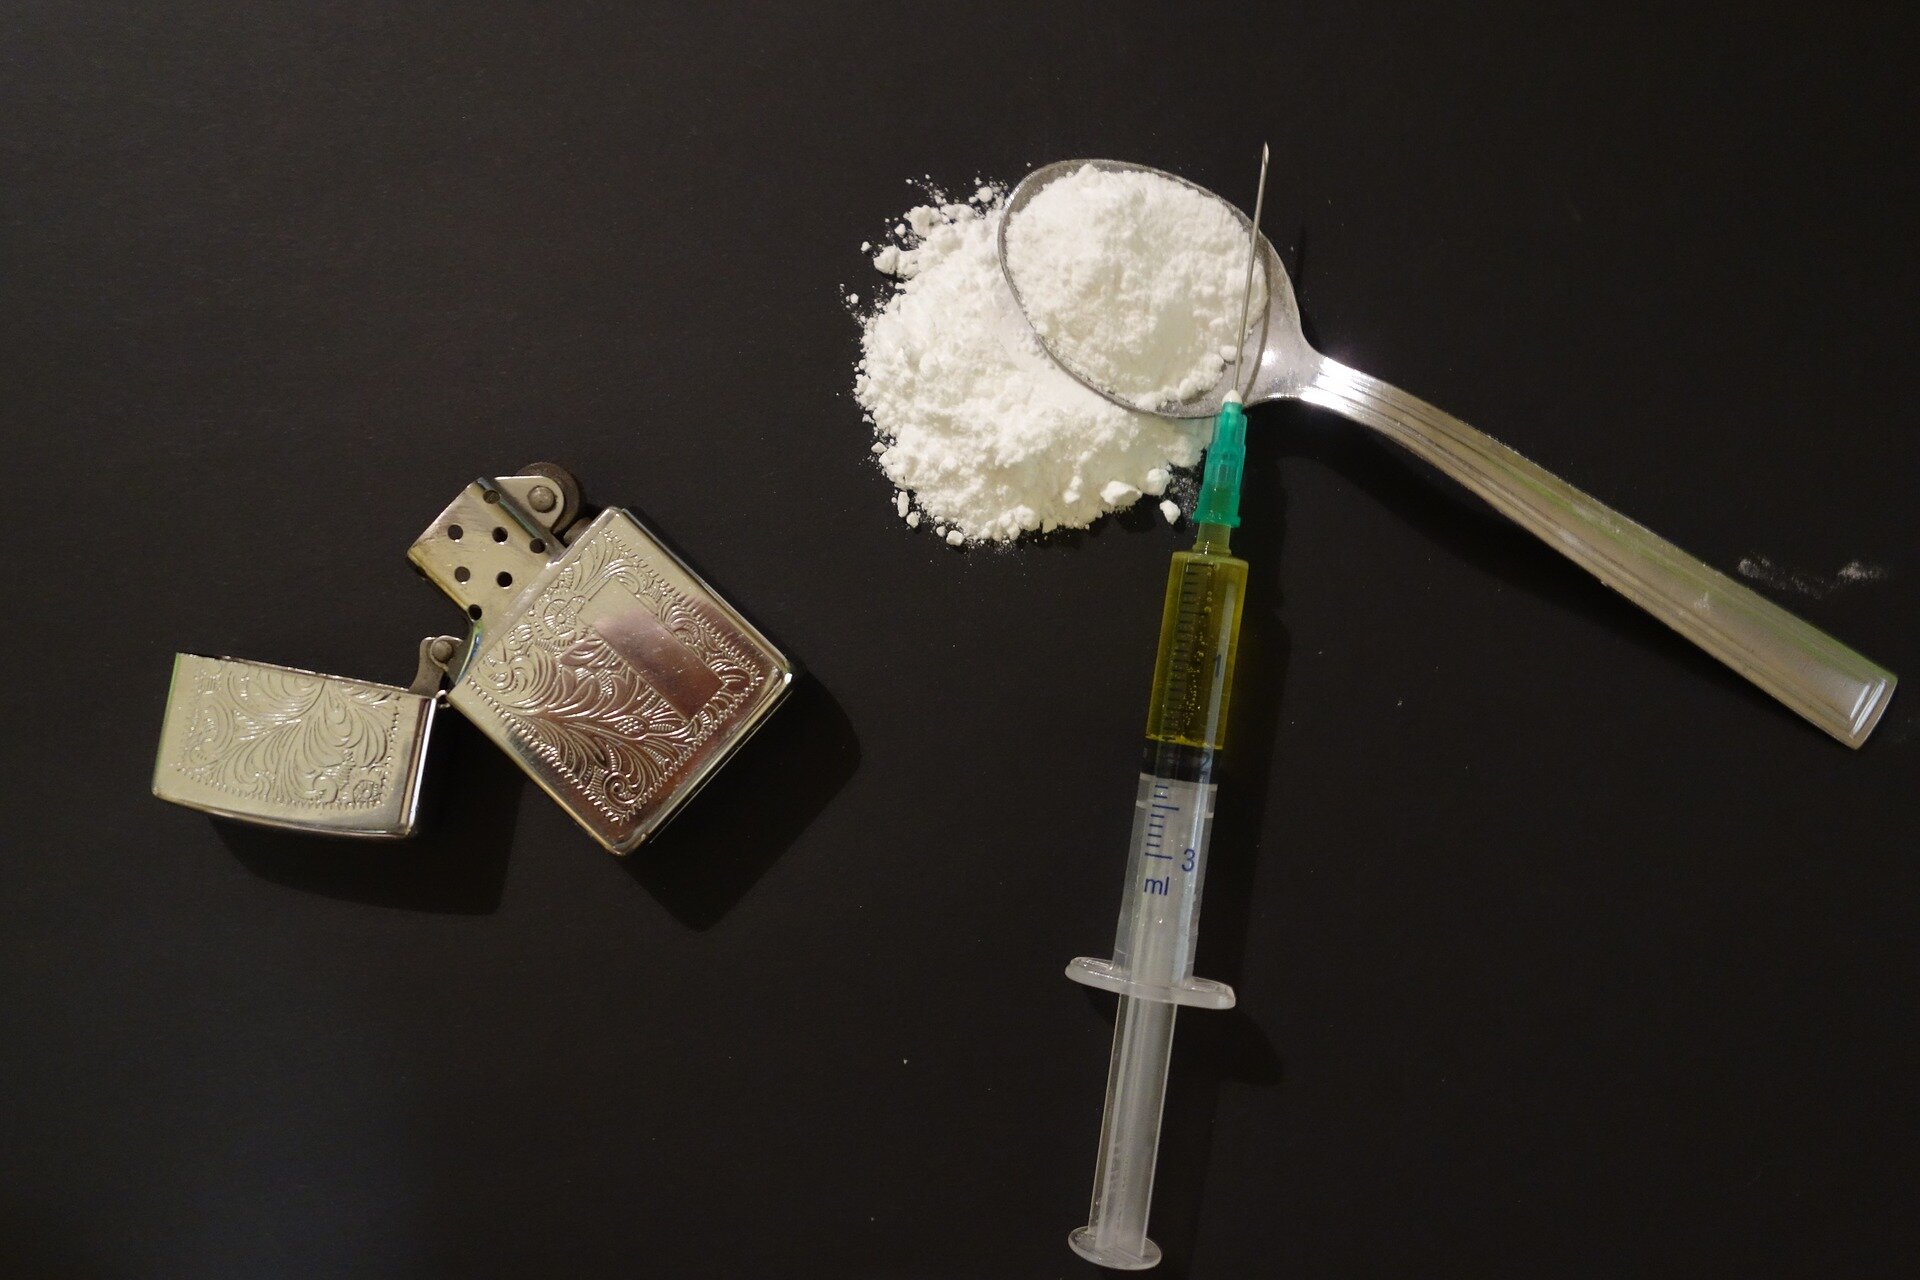 Can a simple fentanyl test curb San Francisco's overdose crisis?